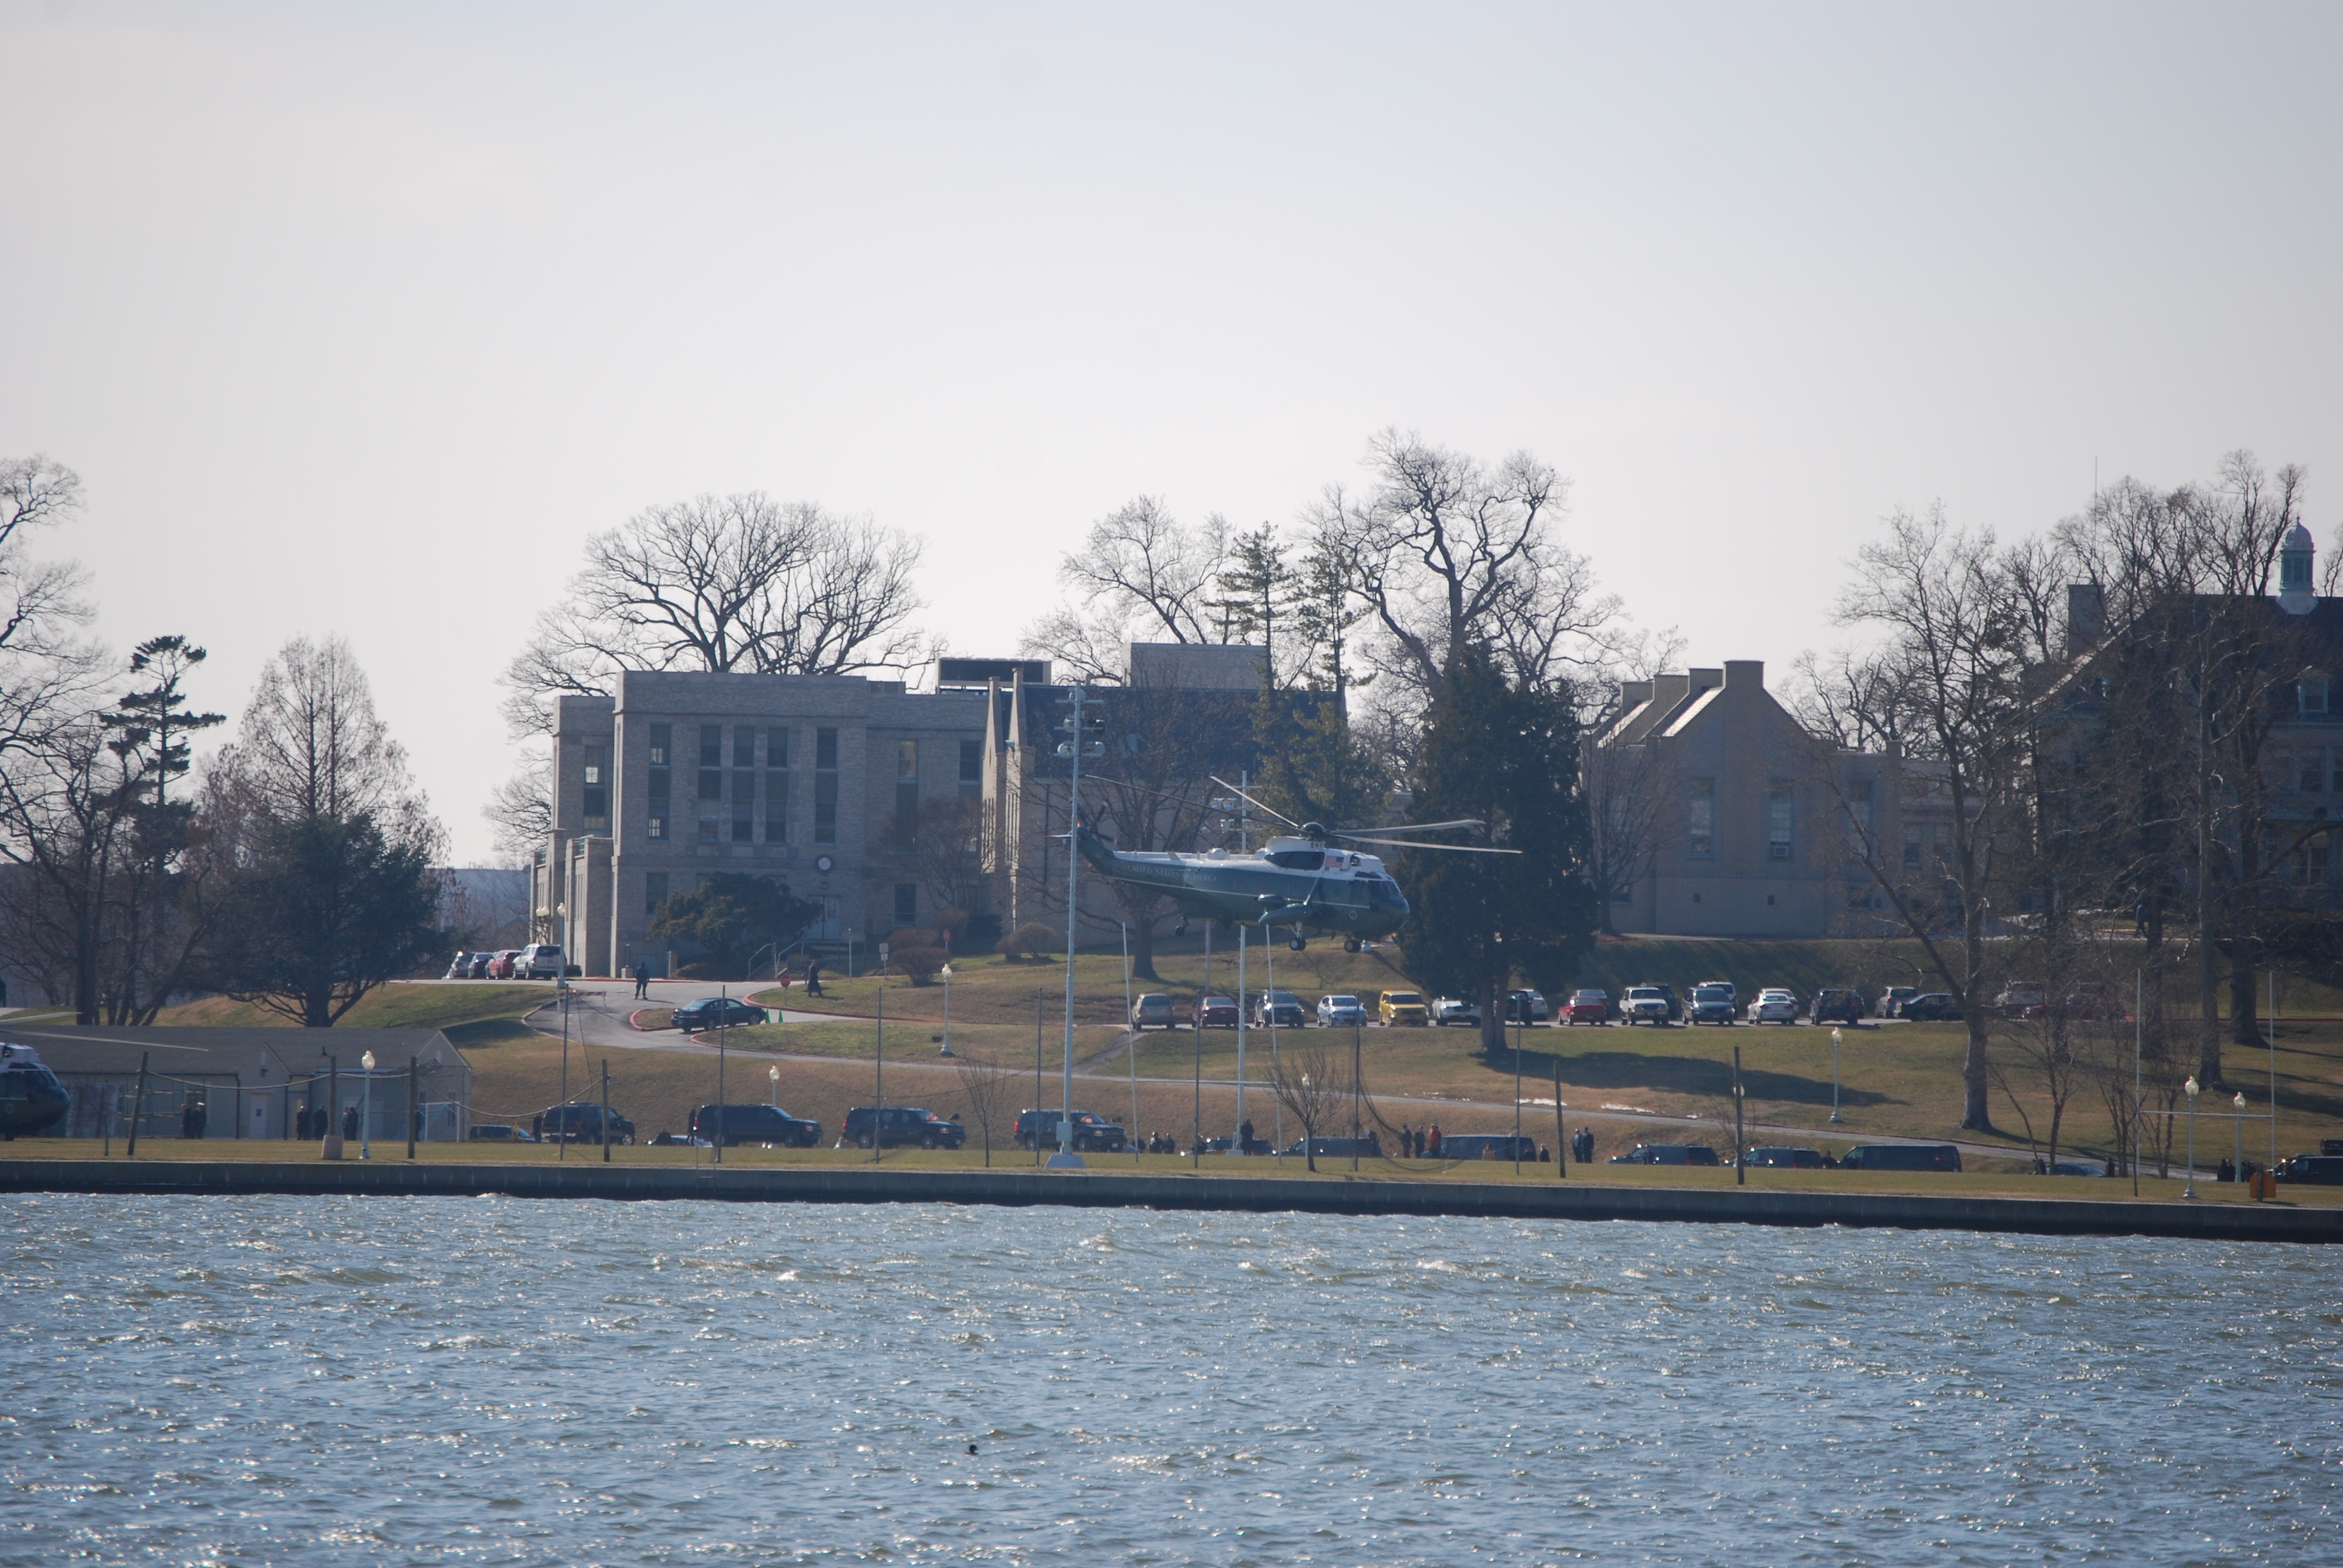 Marine One takes off from the Naval Academy